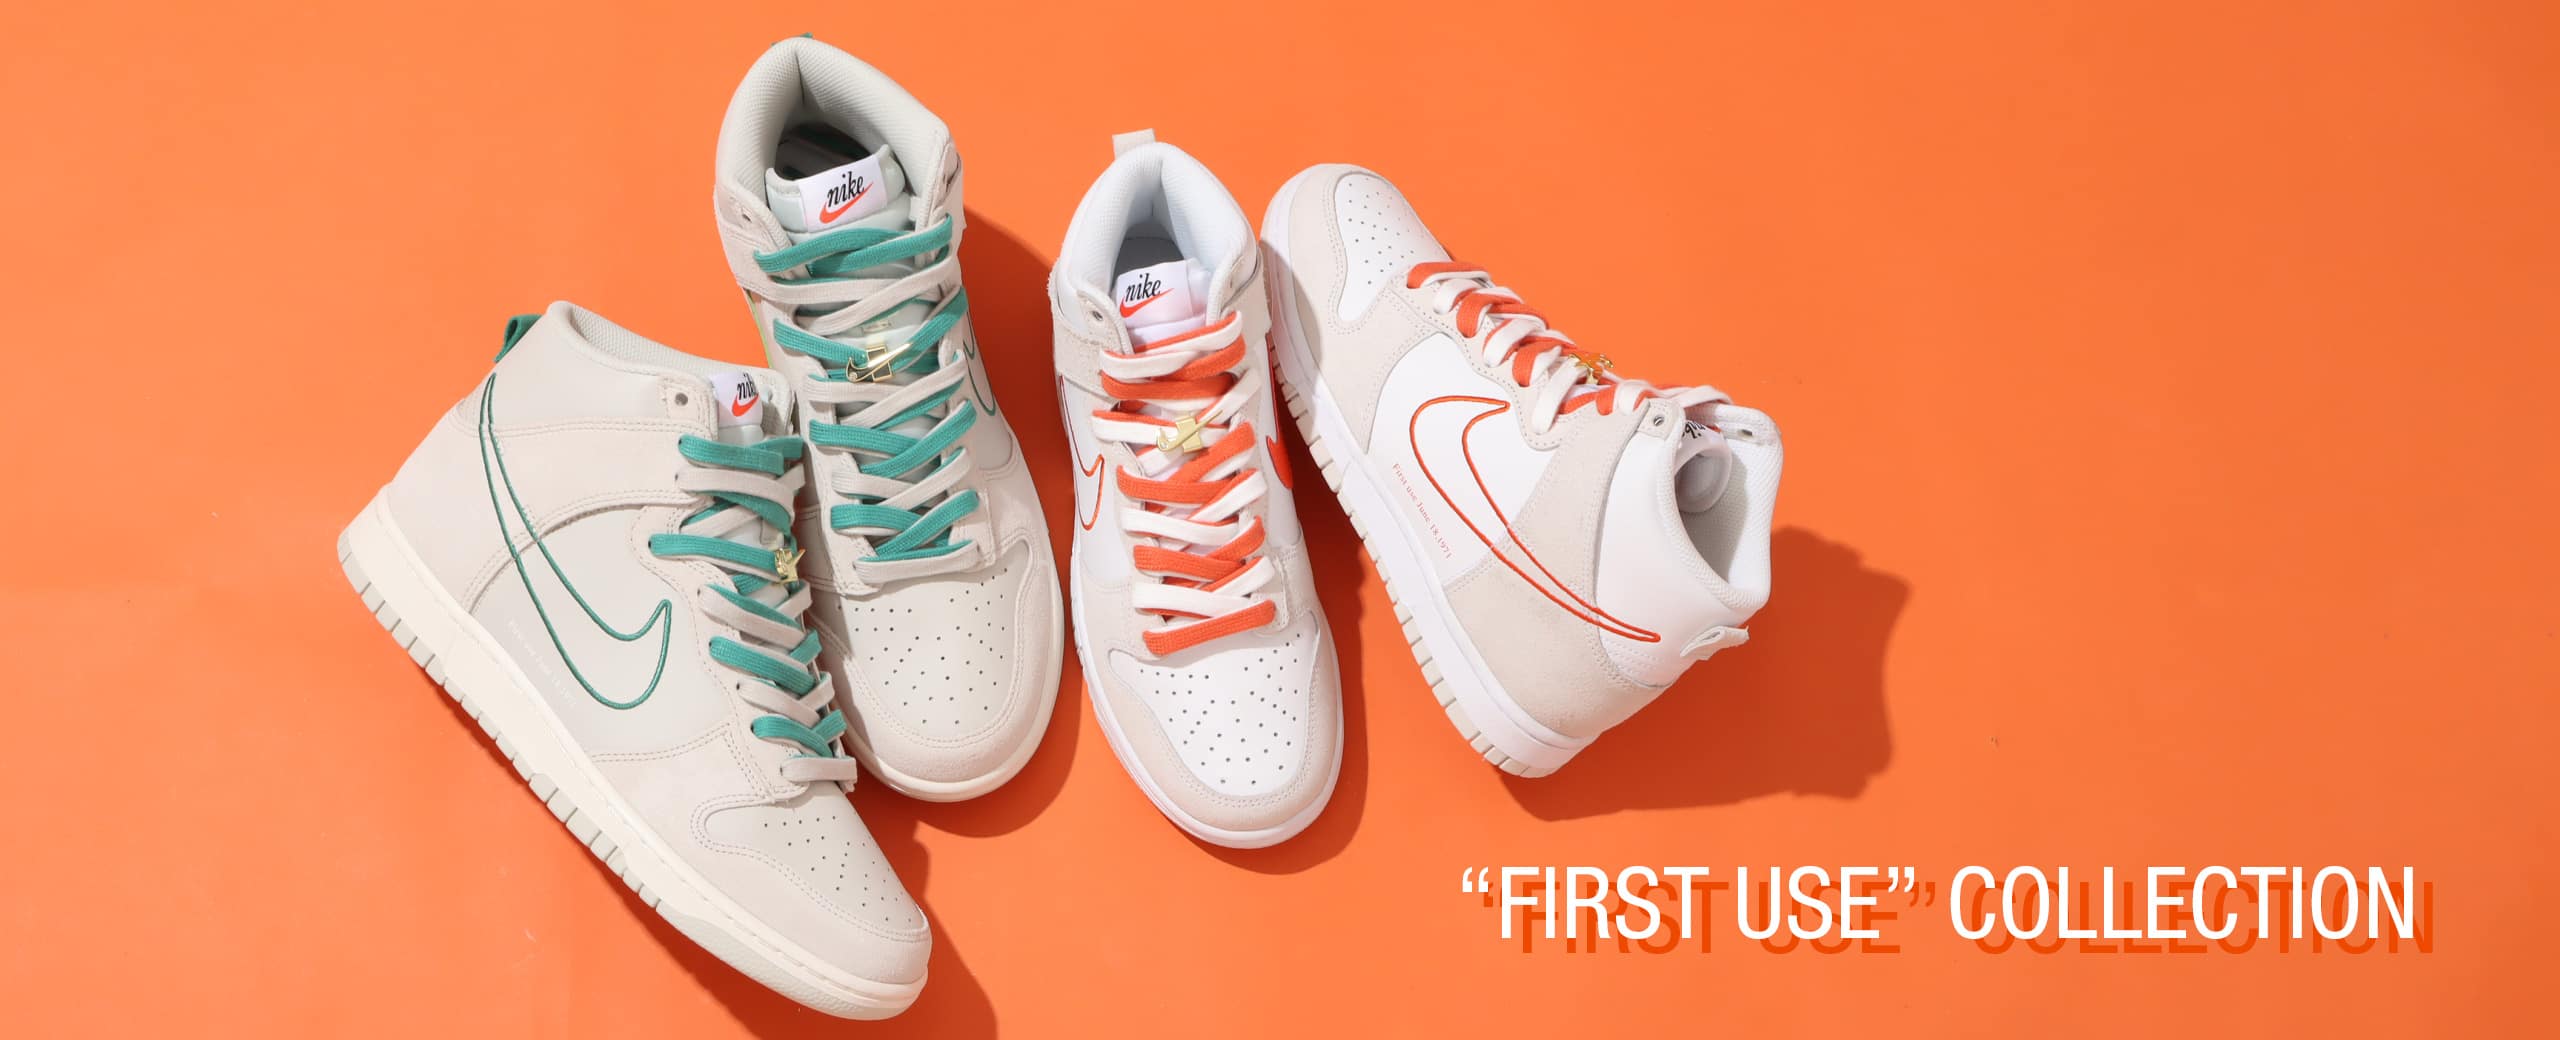 NIKE “FIRST USE” COLLECTION